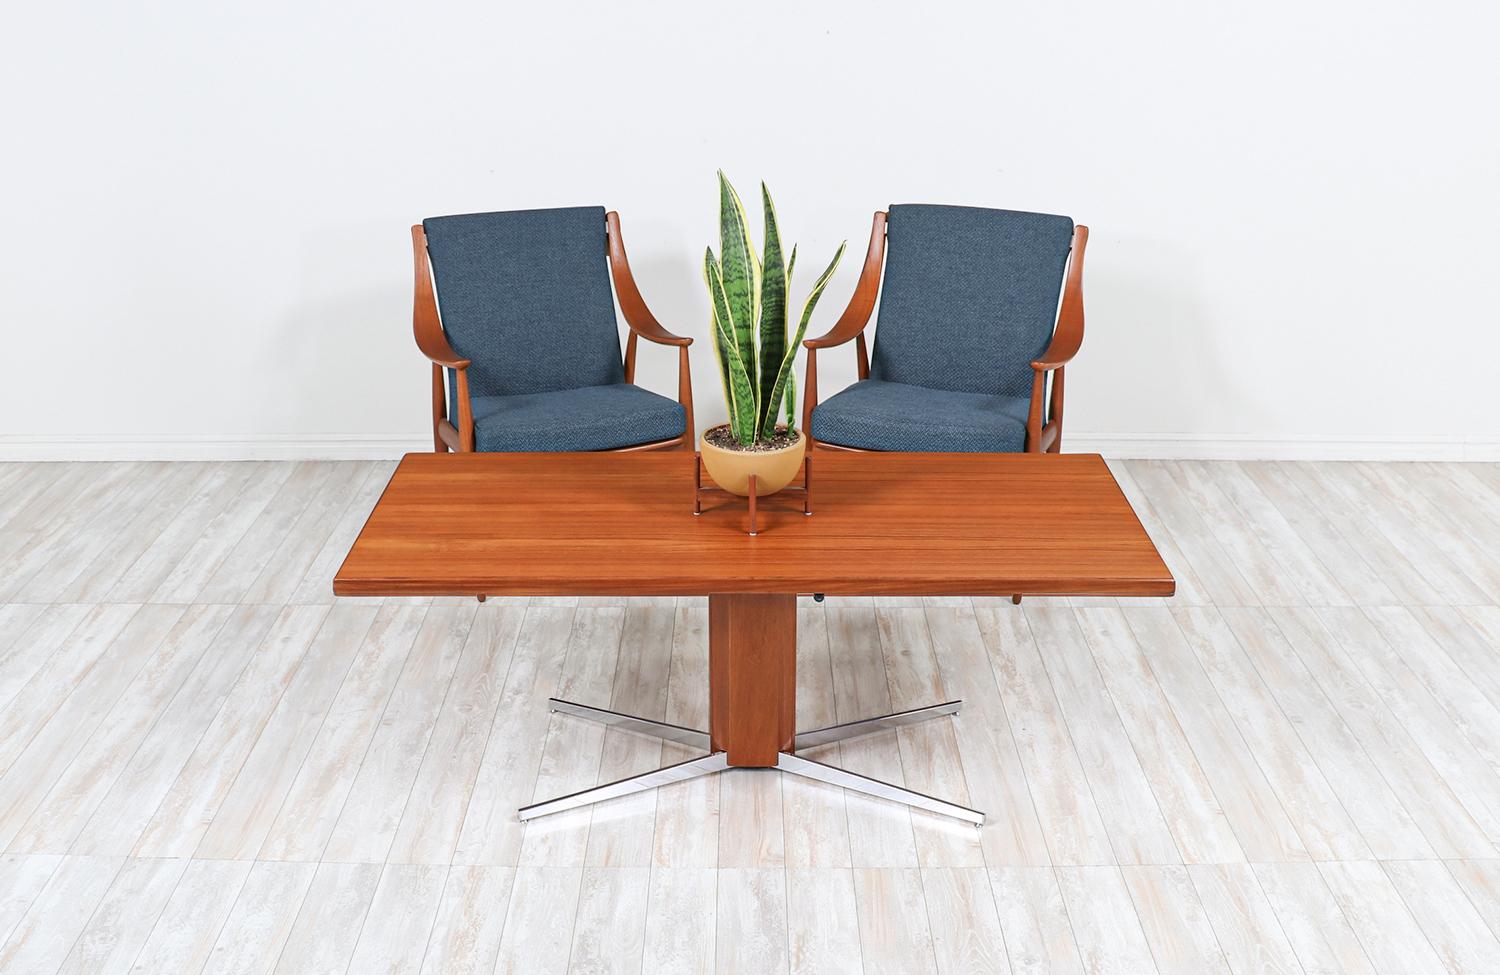 Danish modern teak and steel adjustable table / desk.

________________________________________

Transforming a piece of Mid-Century Modern furniture is like bringing history back to life, and we take this journey with passion and precision. With